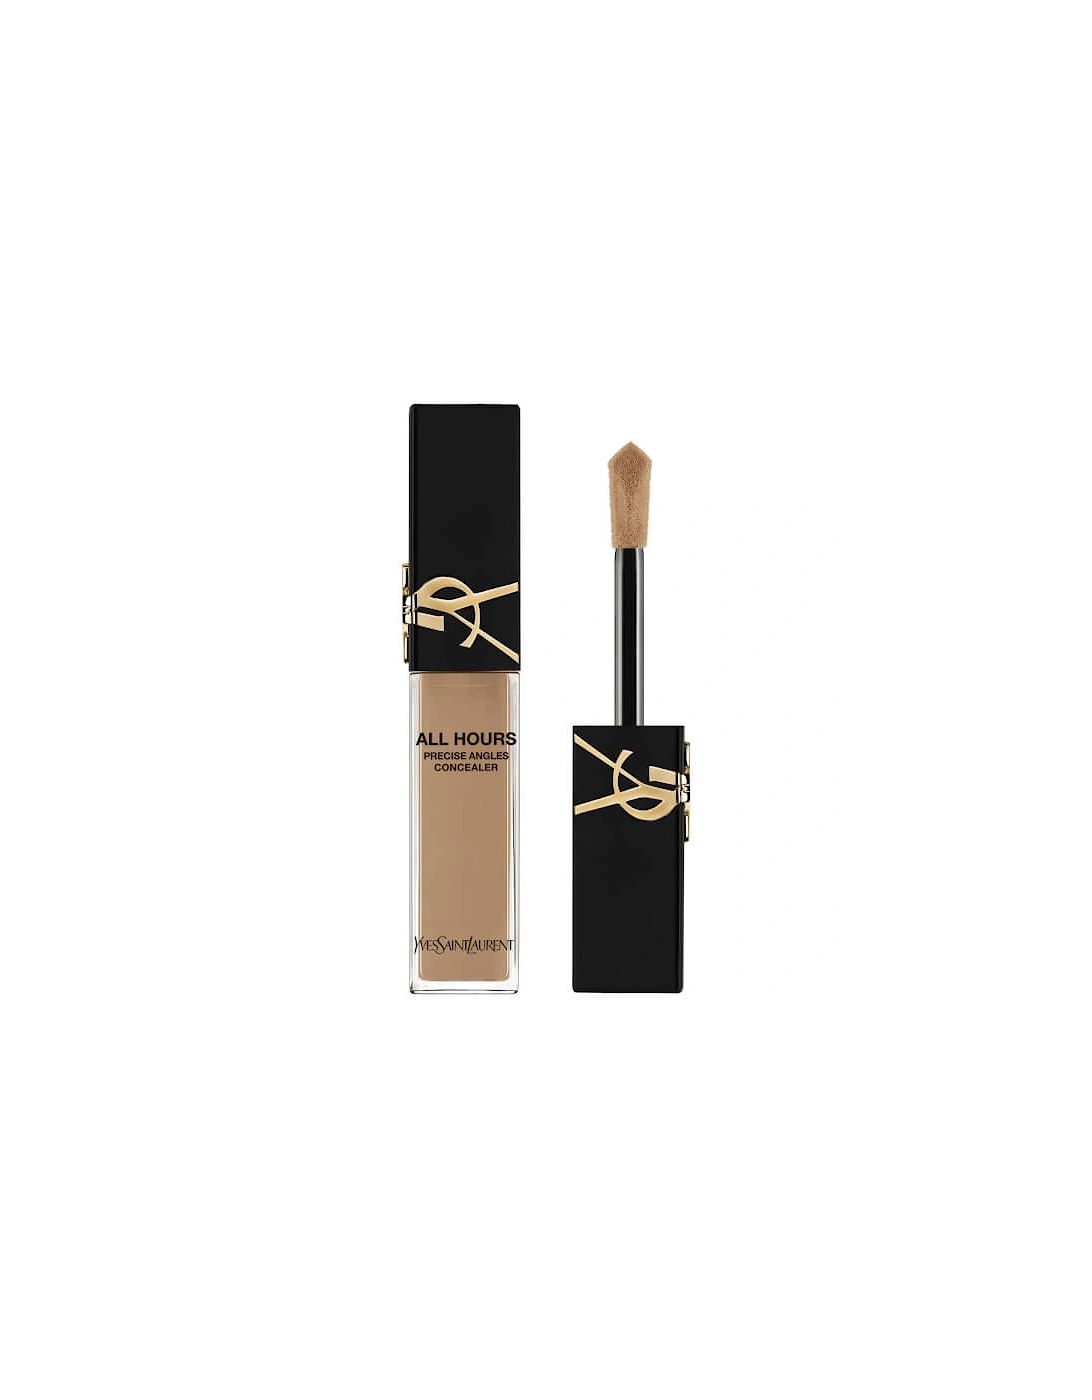 Yves Saint Laurent All Hours Concealer - MN10, 2 of 1